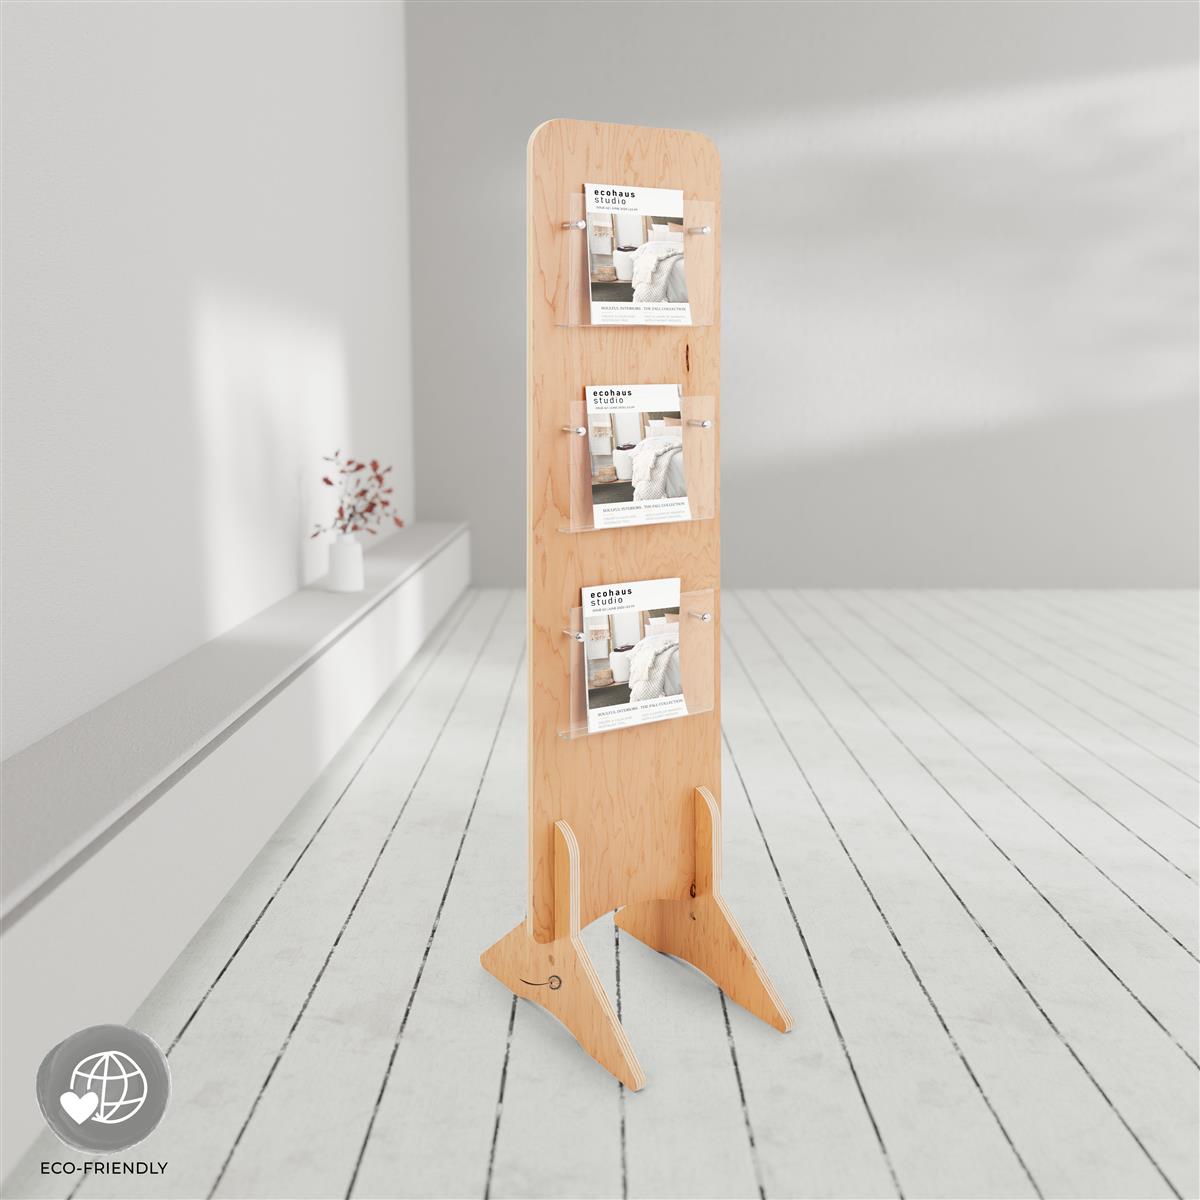 Knockdown Wood Literature Stand | Double-Sided Design